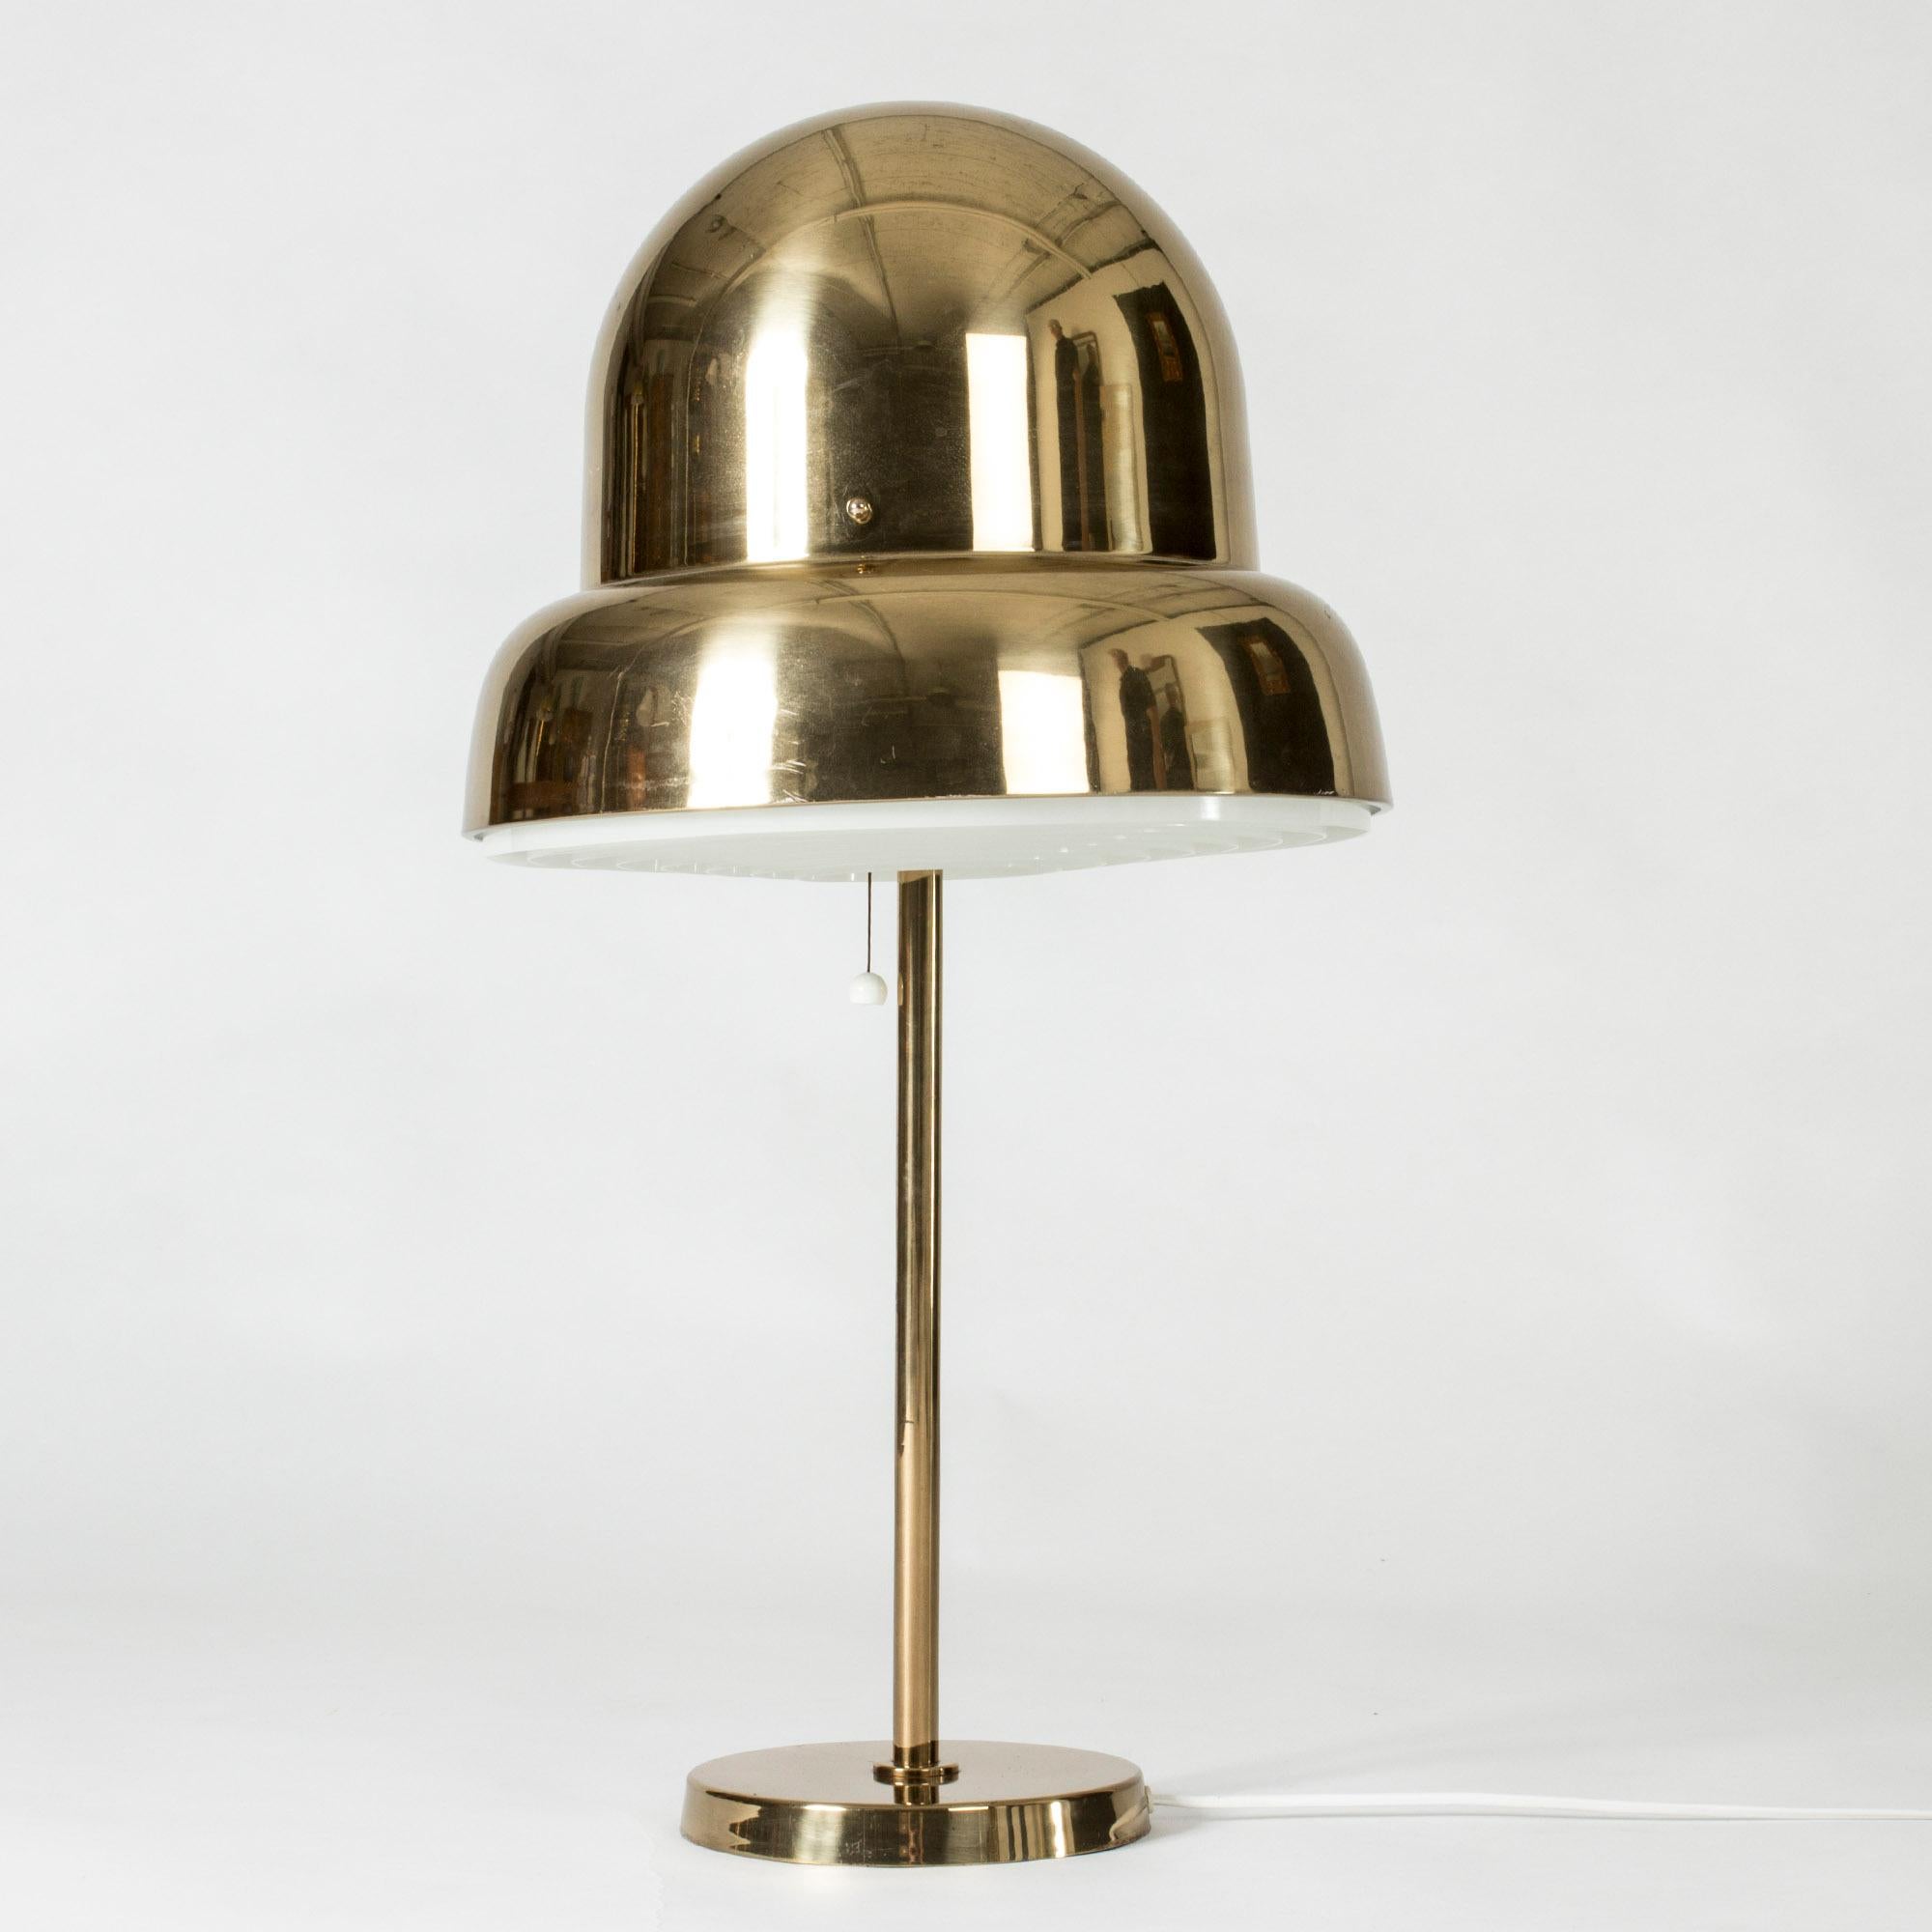 Cool brass table lamp from Bergboms, with an oversized lampshade in a rounded, organic form. A lamella shields the light on the underside.